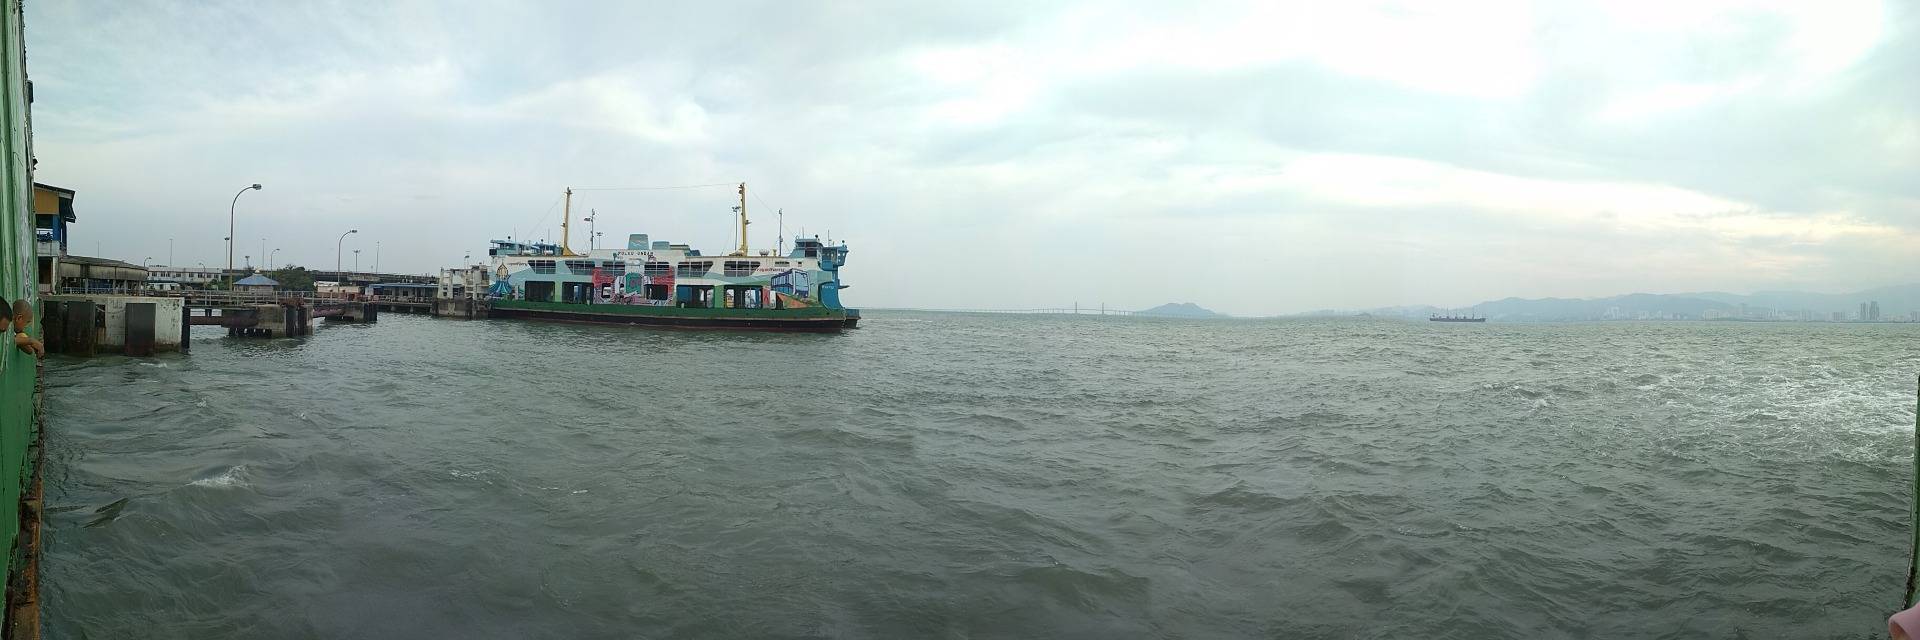 Panoramic view from the side of the ferry before departure.